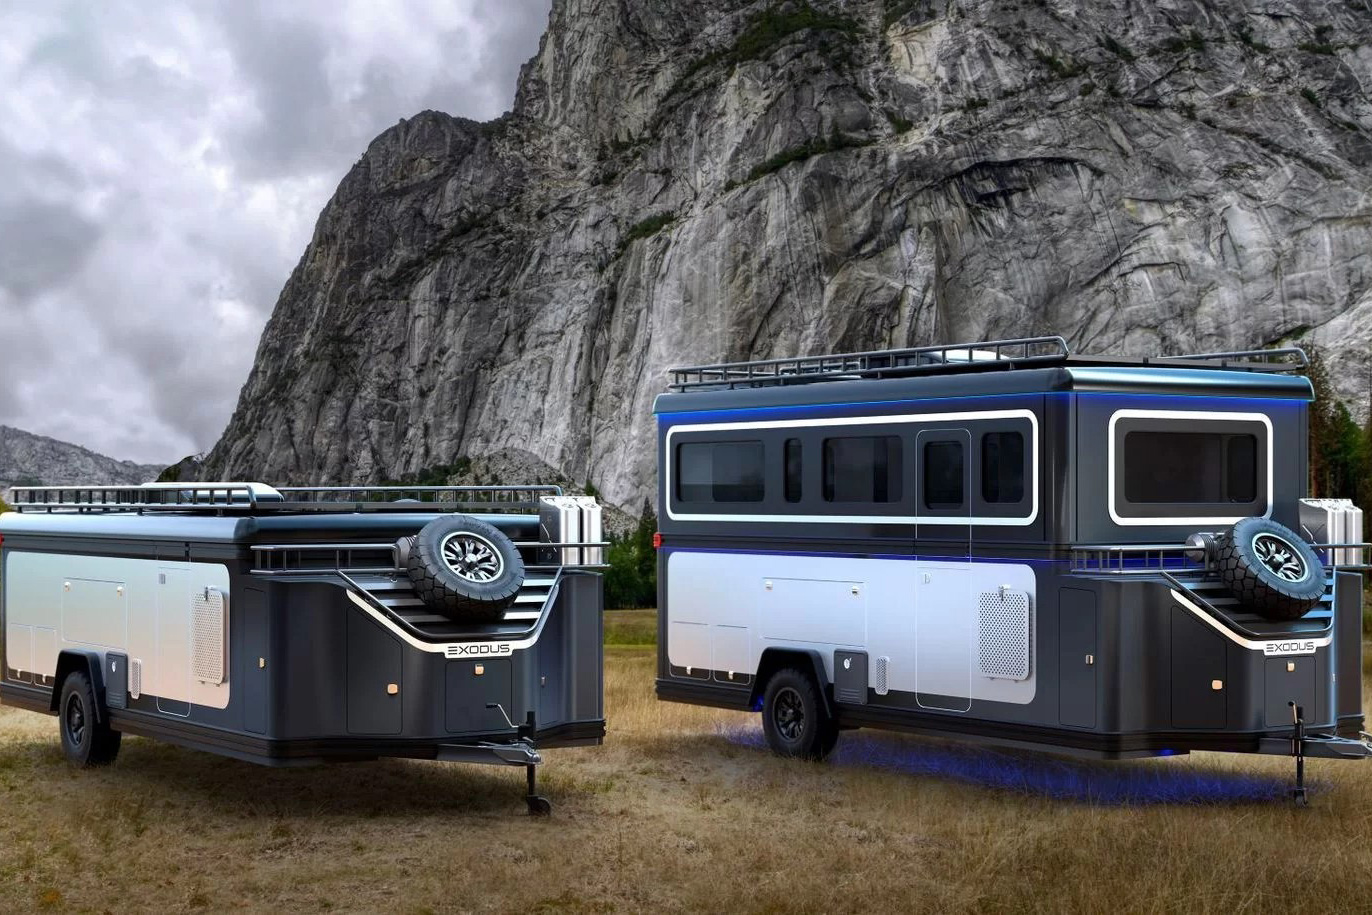 Side-by-side comparison of the pop-top collapsibility of the Exodus Capax travel trailer.